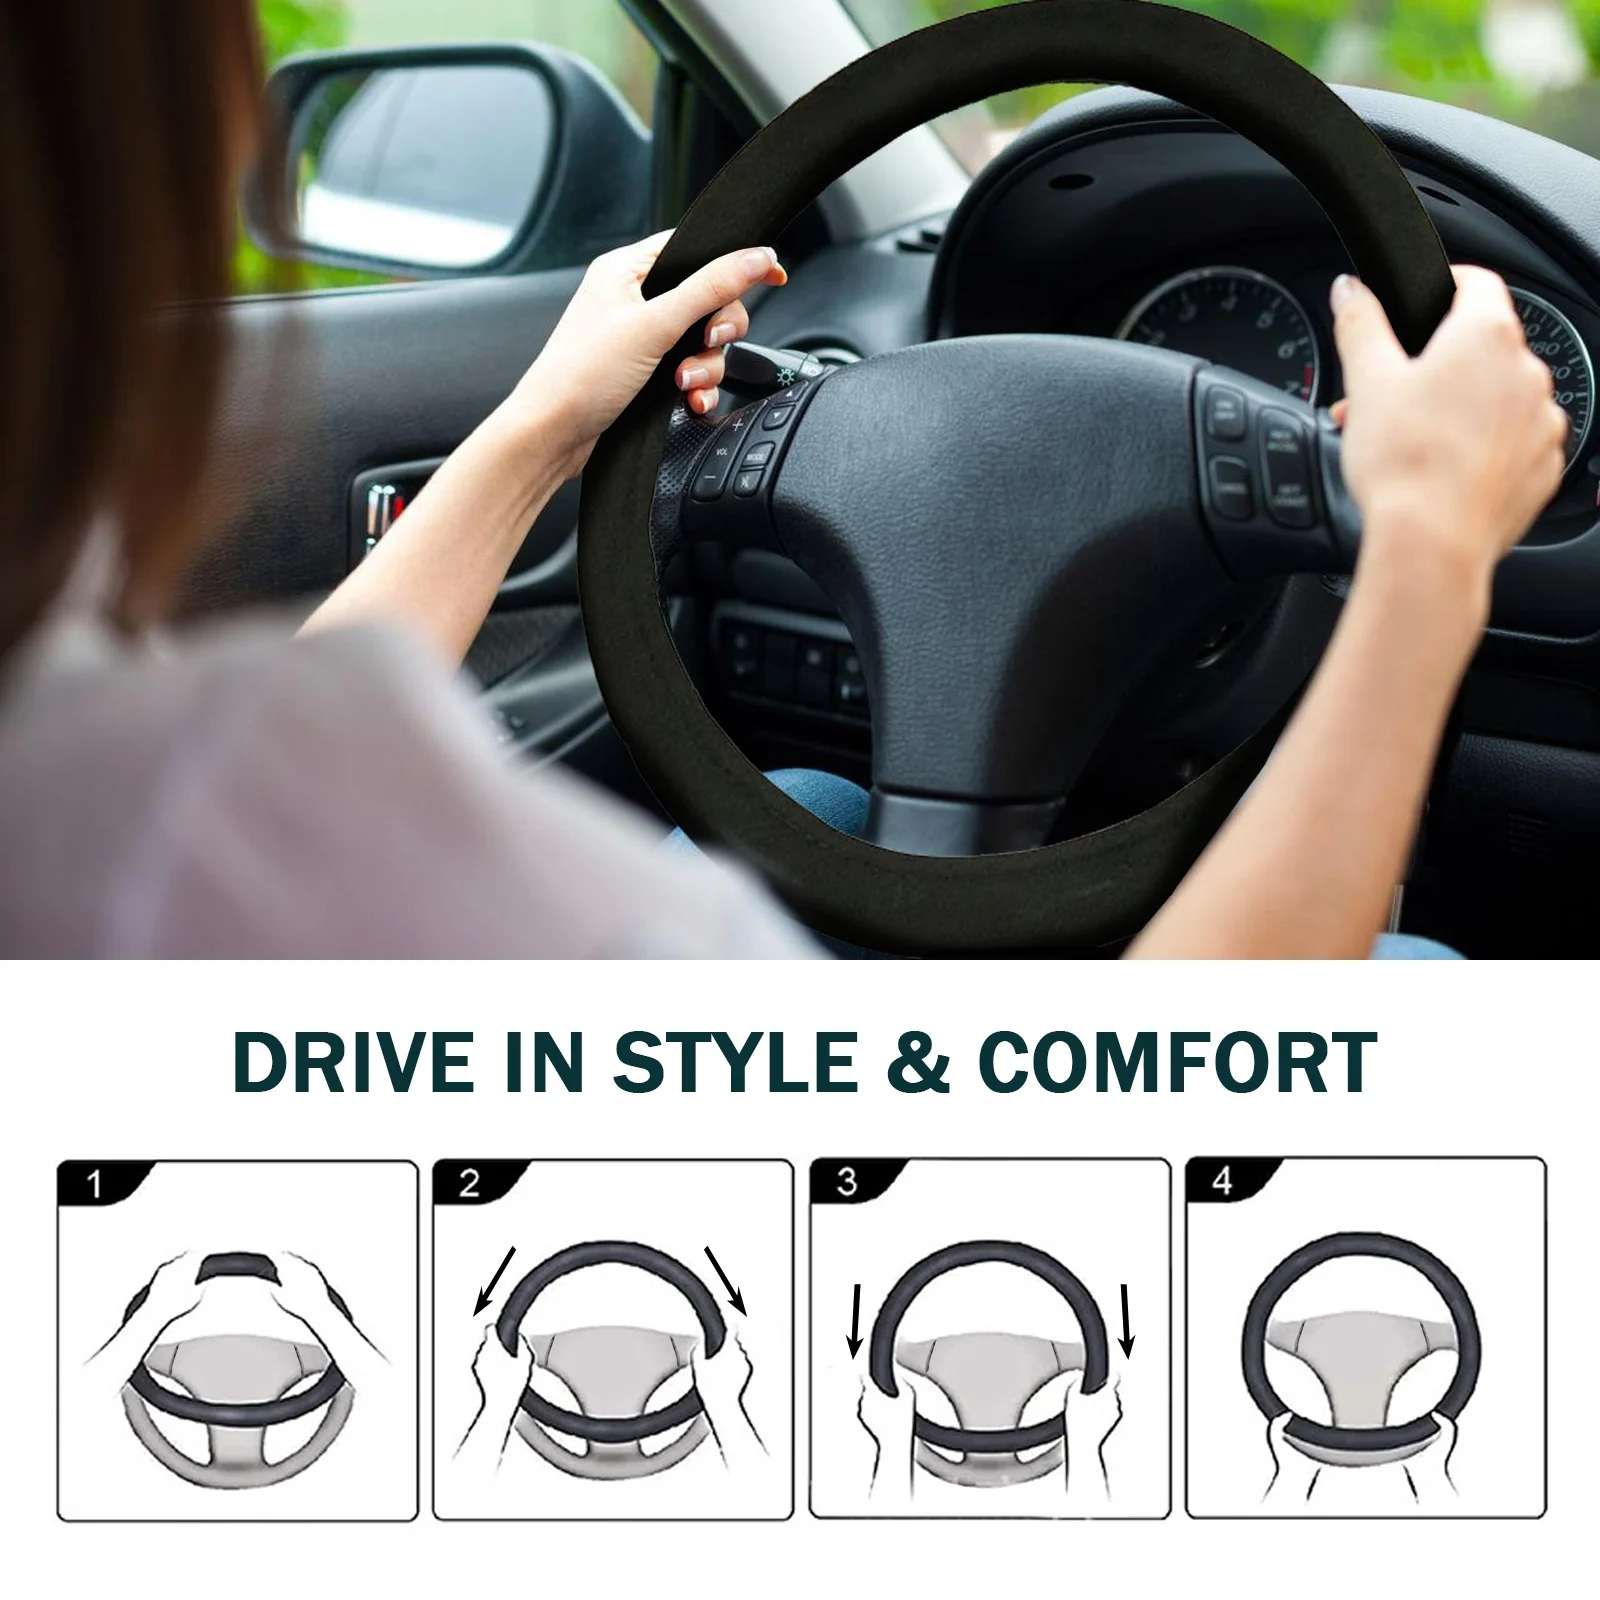 

Universal Car Lighter Electric Steering Wheel Cover 38CM Warmer Anti-slip Heated Heating Auto Winter Super Soft Steering Cover